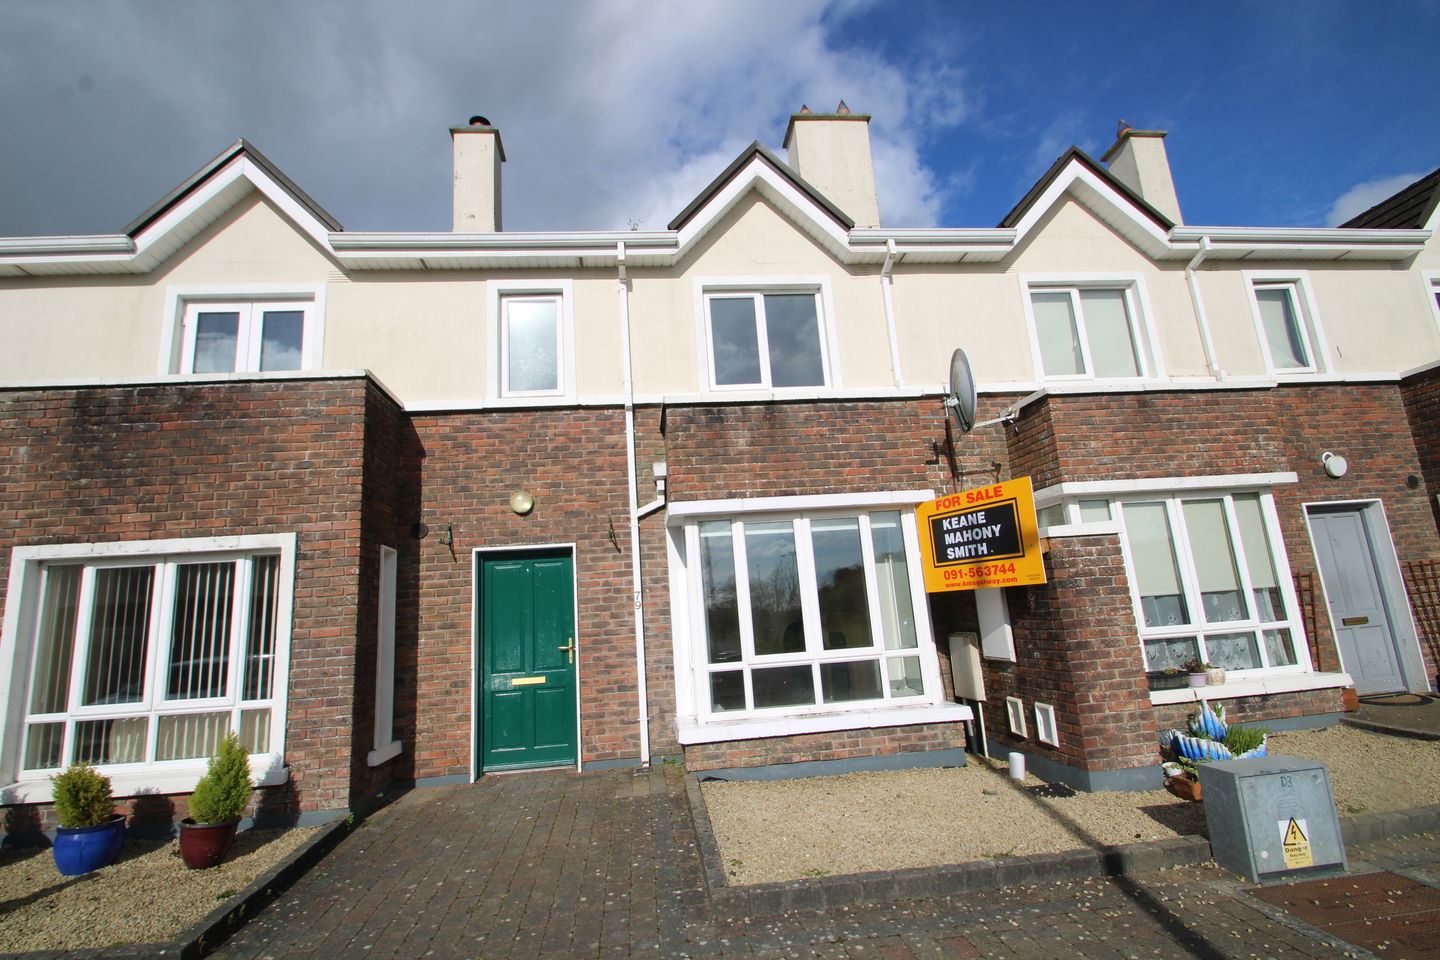 79 Cúirt Na Habhann, Claregalway, Claregalway, Co. Galway, H91PVH7